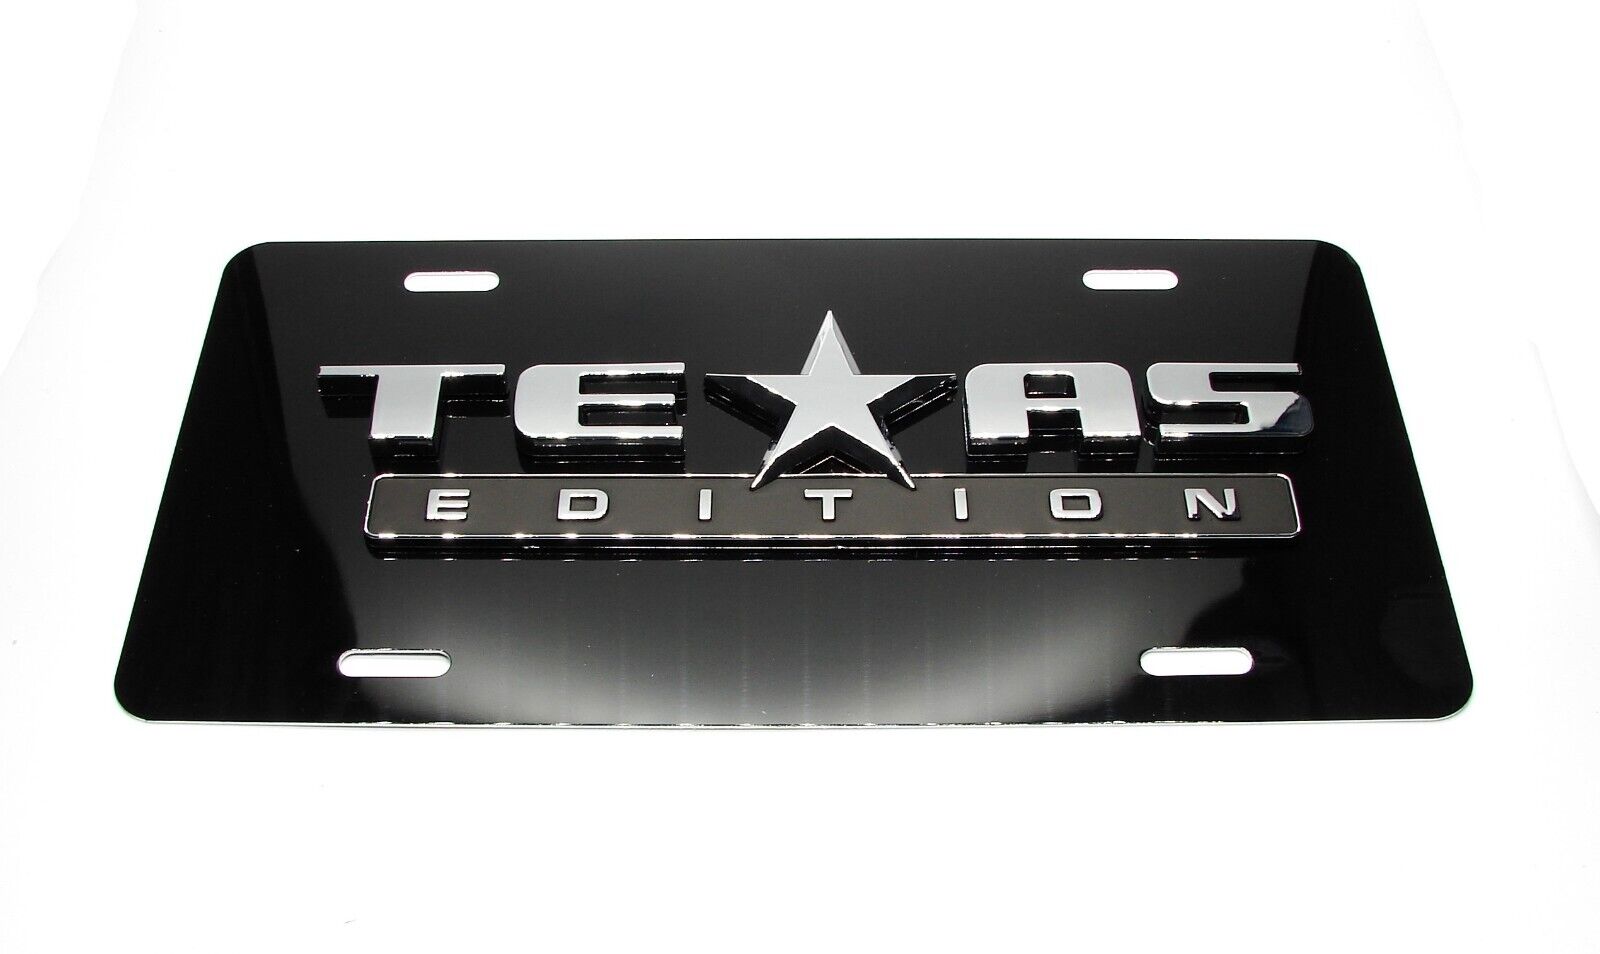 TEXAS EDITION EMBLEM METAL LICENSE PLATE WITH BLACK FINISH